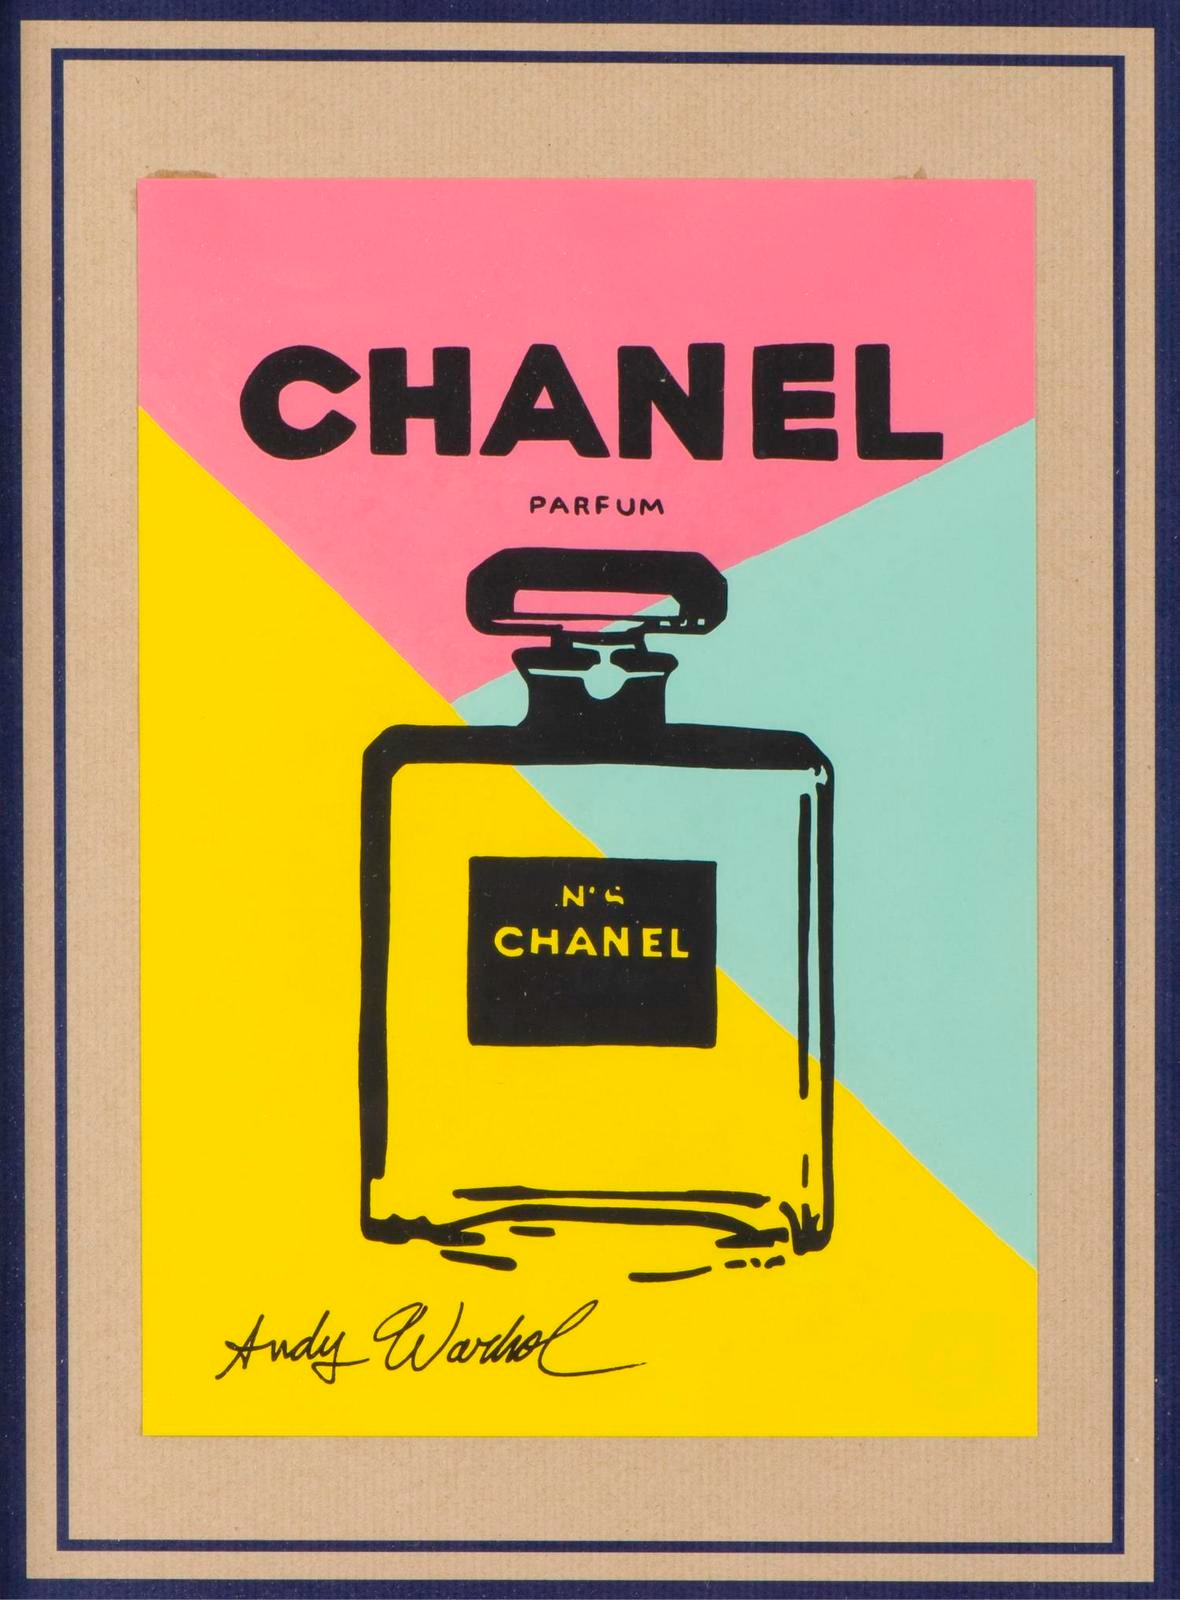 Artwork by Andy Warhol, Chanel, Made of gouache on paper